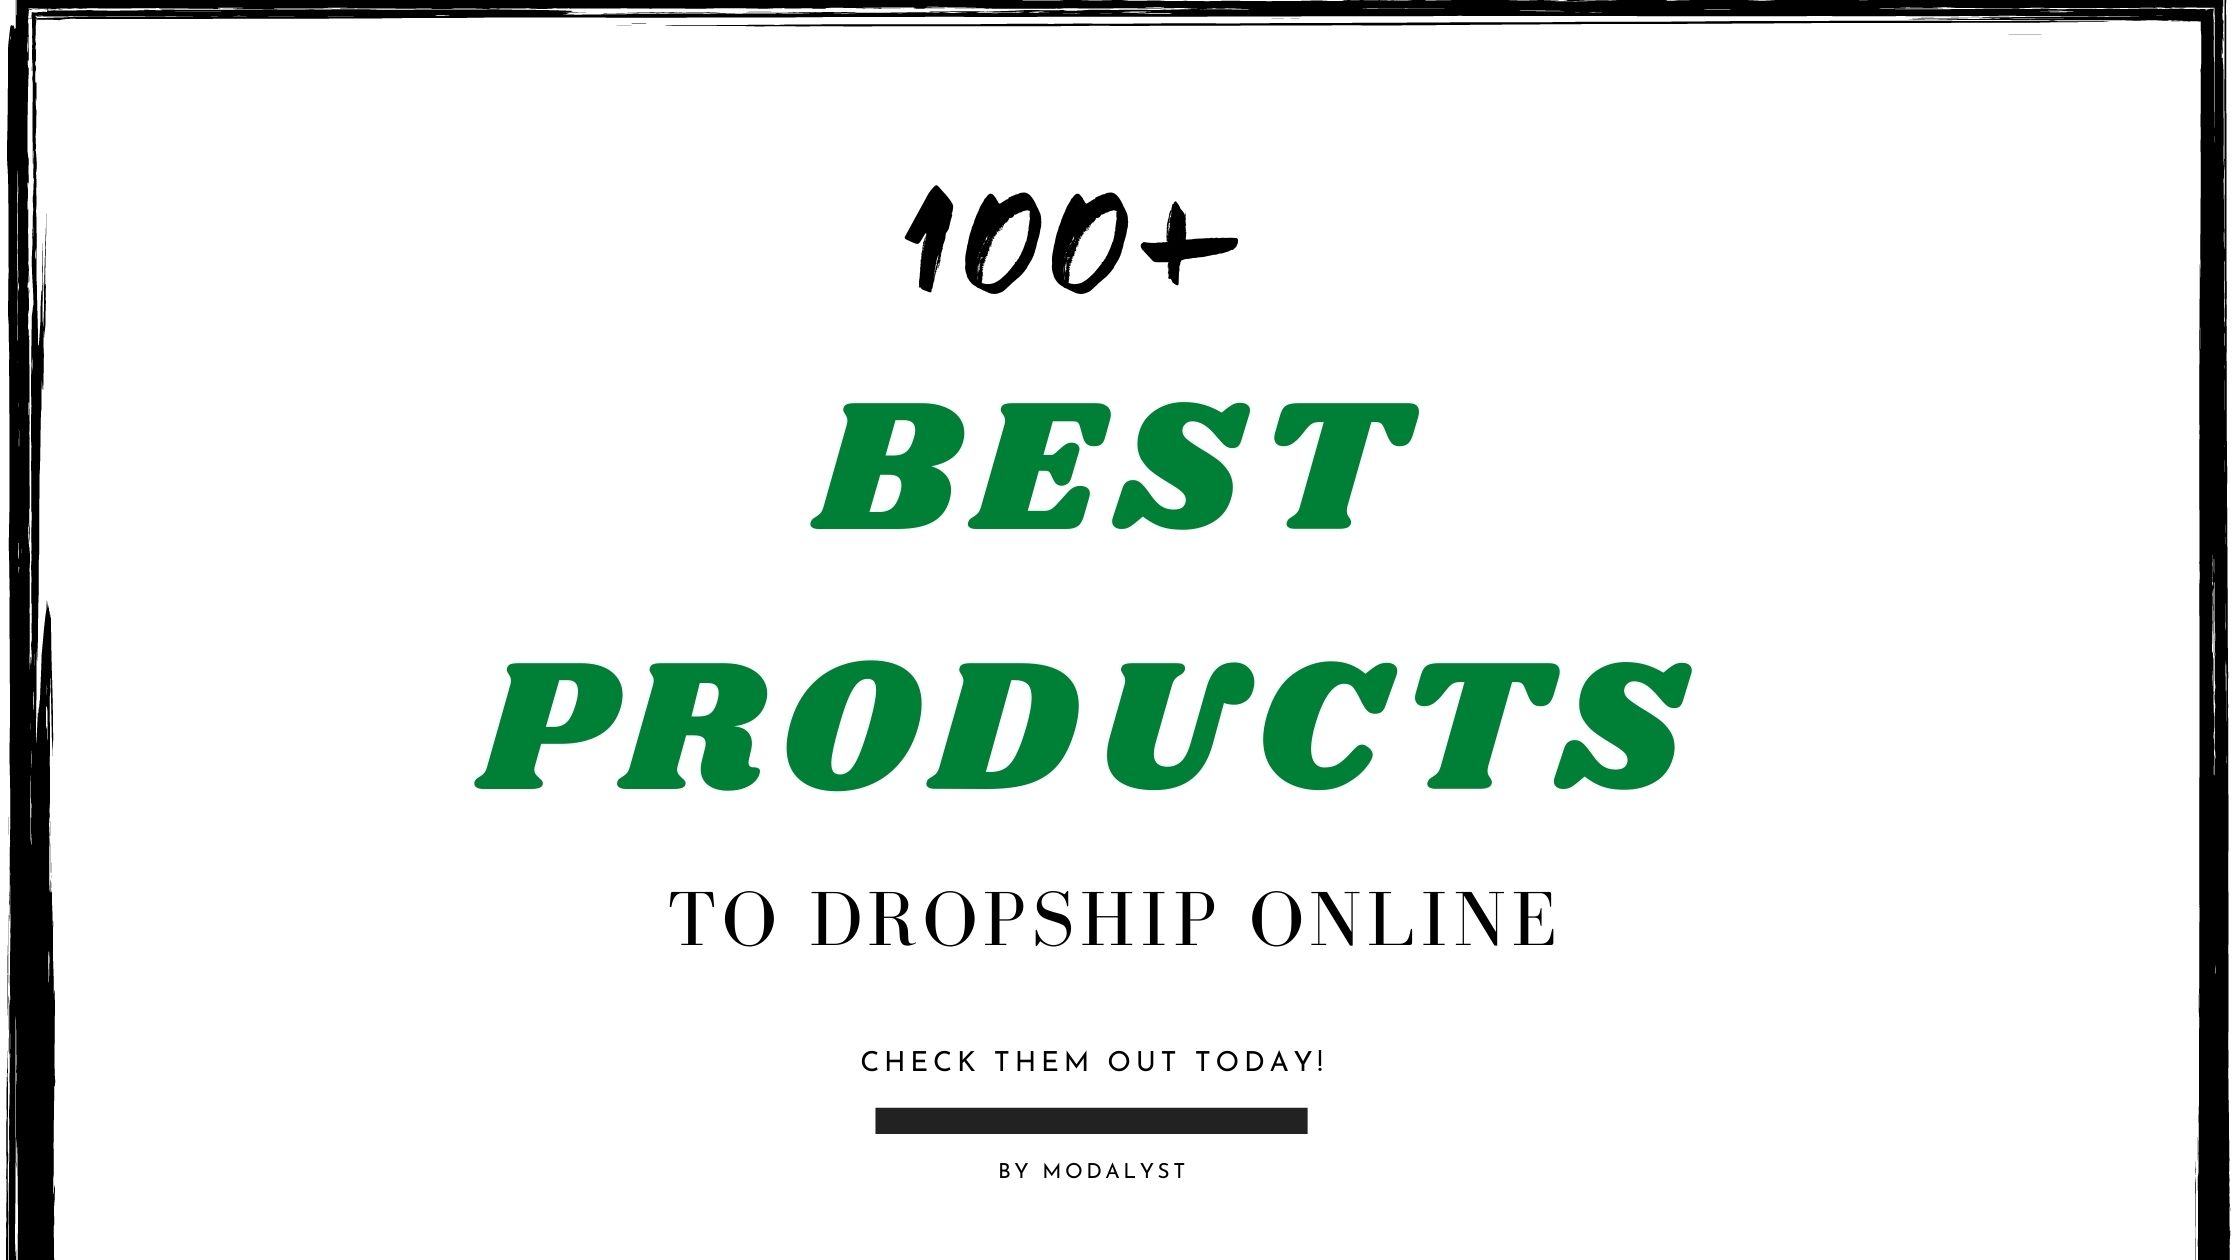 100 best products to dropship in 2020